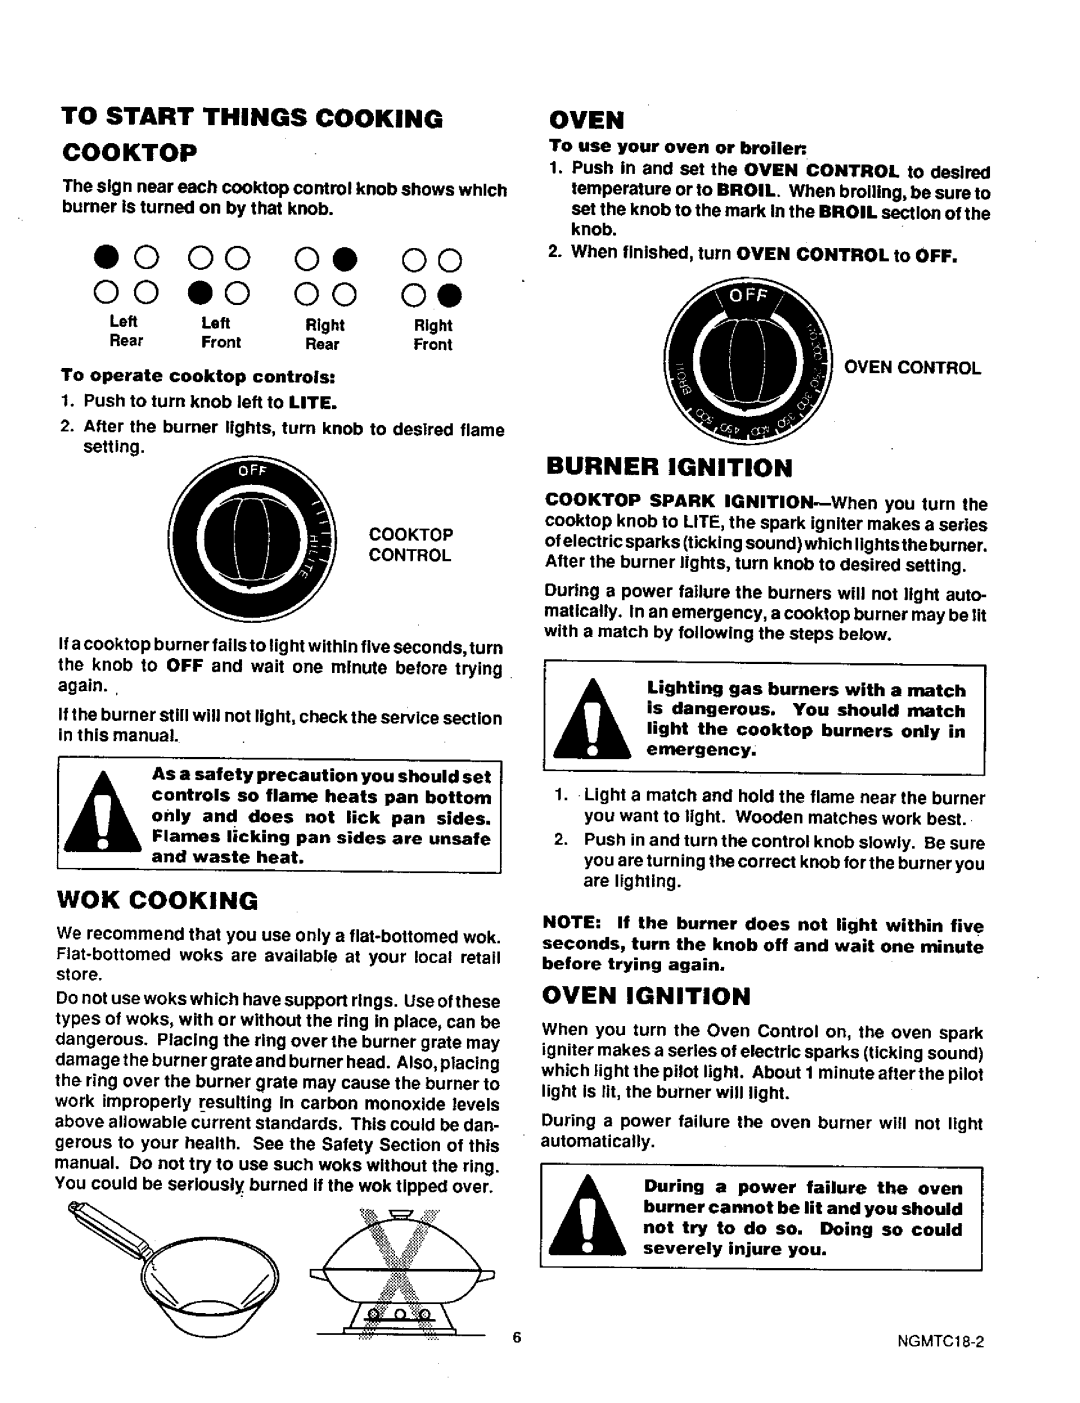 Sears 71381 Wok Cooking, To Start Things Cooking Cooktop, Burner Ignition, Oven Ignition, eO O0 Oe O0 O0 eO O0 Oe 